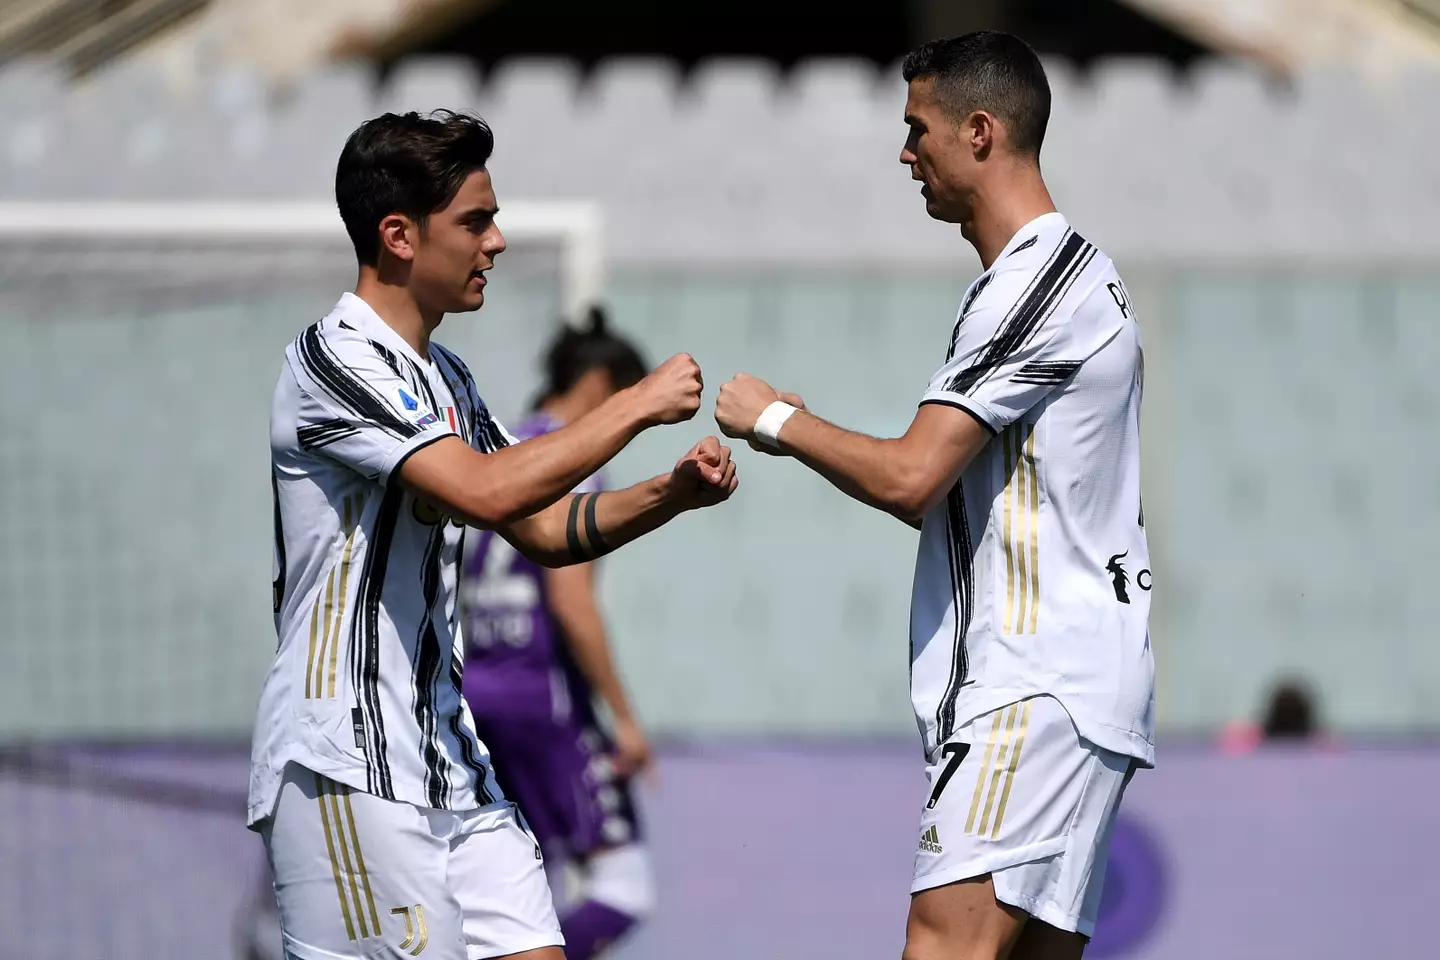 Paulo Dybala and Cristiano Ronaldo embrace during a league match for Juventus. Image: Getty